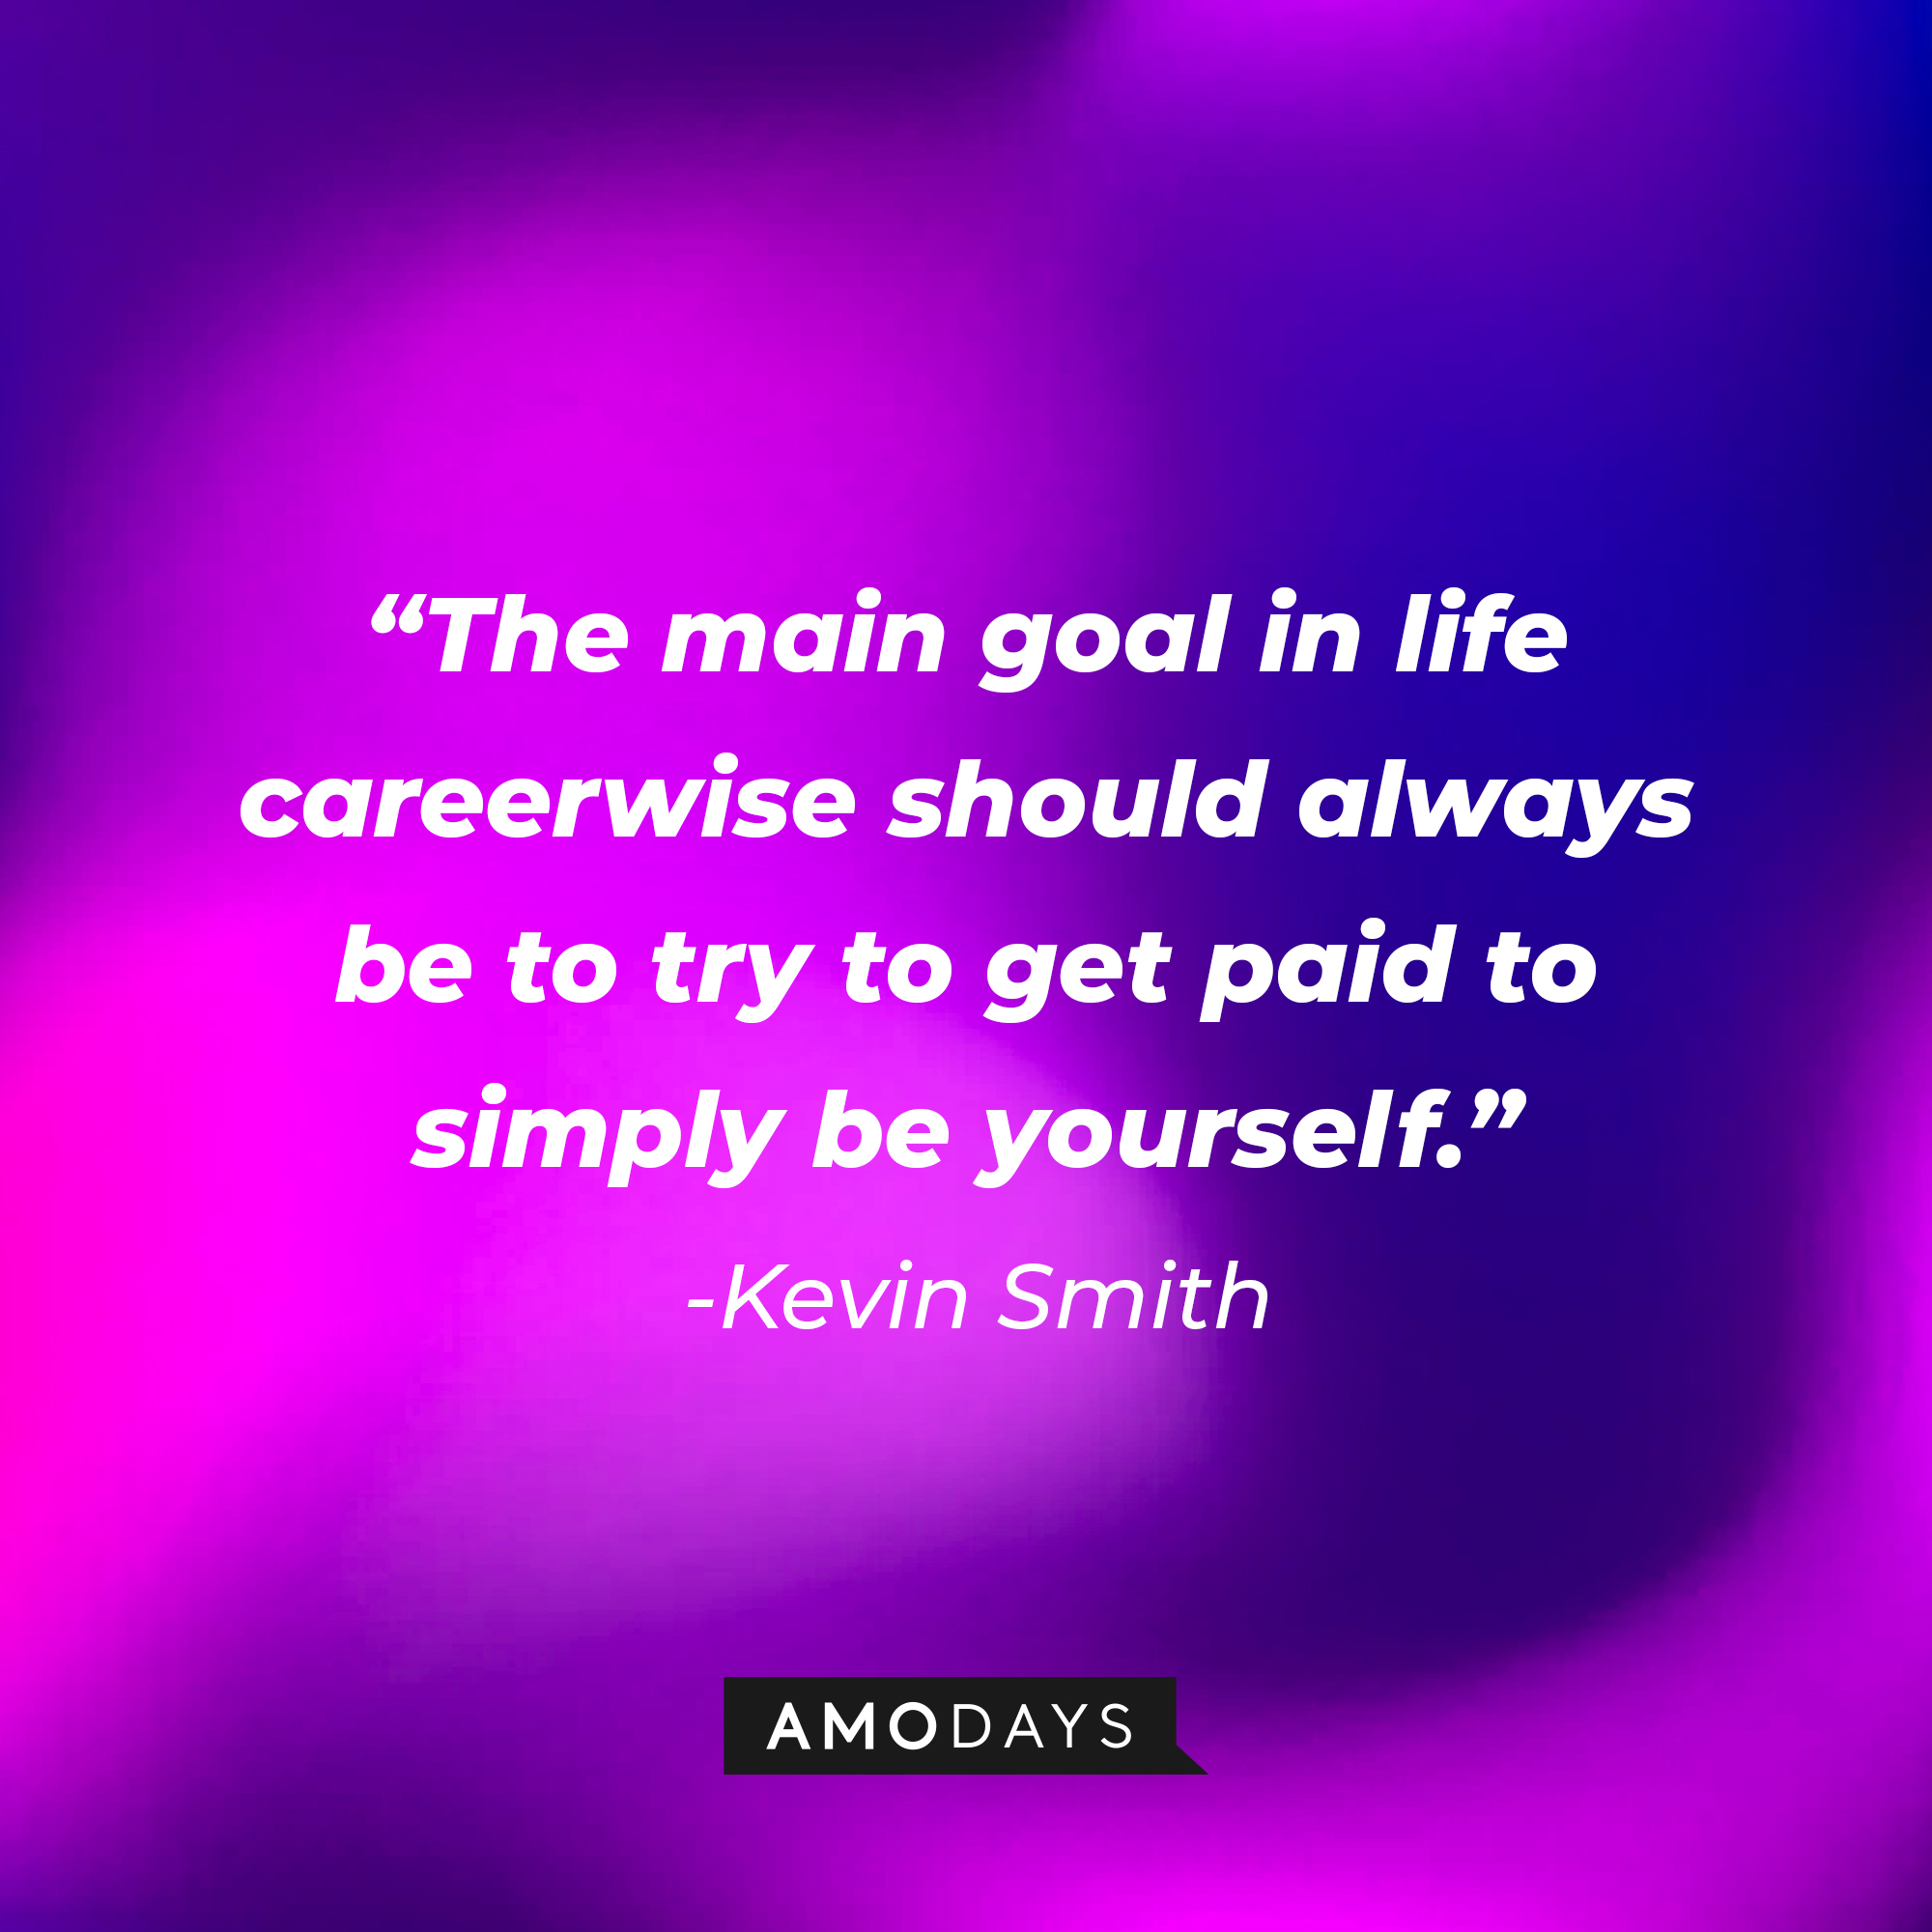 Kevin Smith’s quote: "The main goal in life careerwise should always be to try to get paid to simply be yourself.” | Source: AmoDays